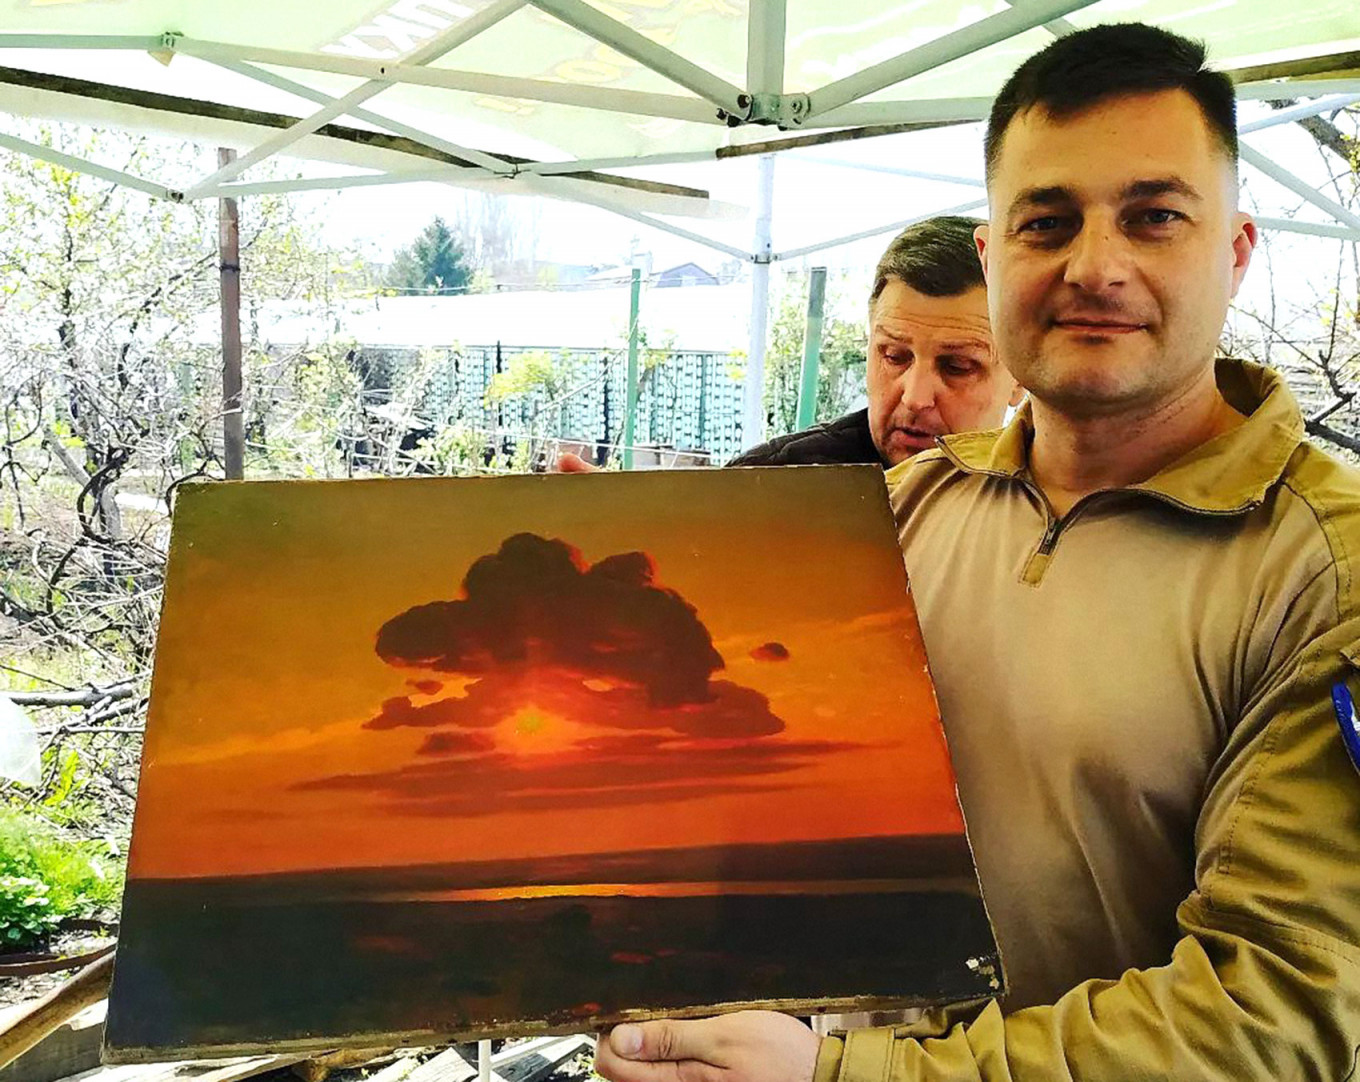 How Russia ‘Removed’ Priceless Kuindzhi Artworks from Ukraine’s Mariupol